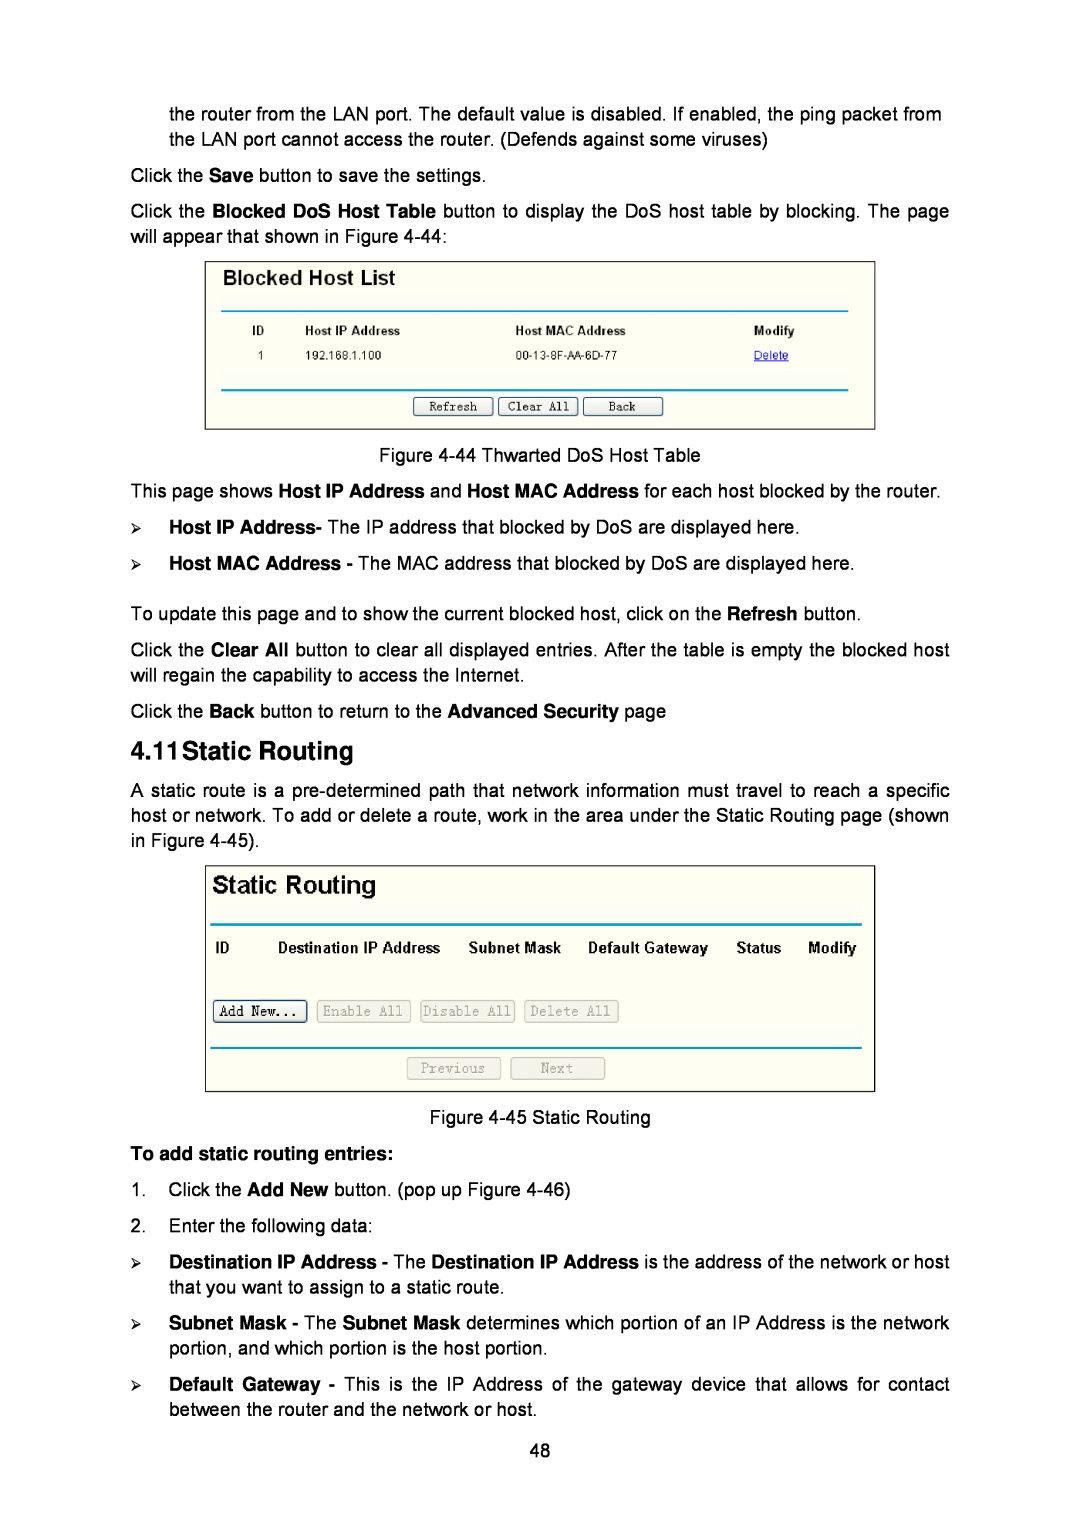 TP-Link TL-WA5110G manual 4.11Static Routing, To add static routing entries 